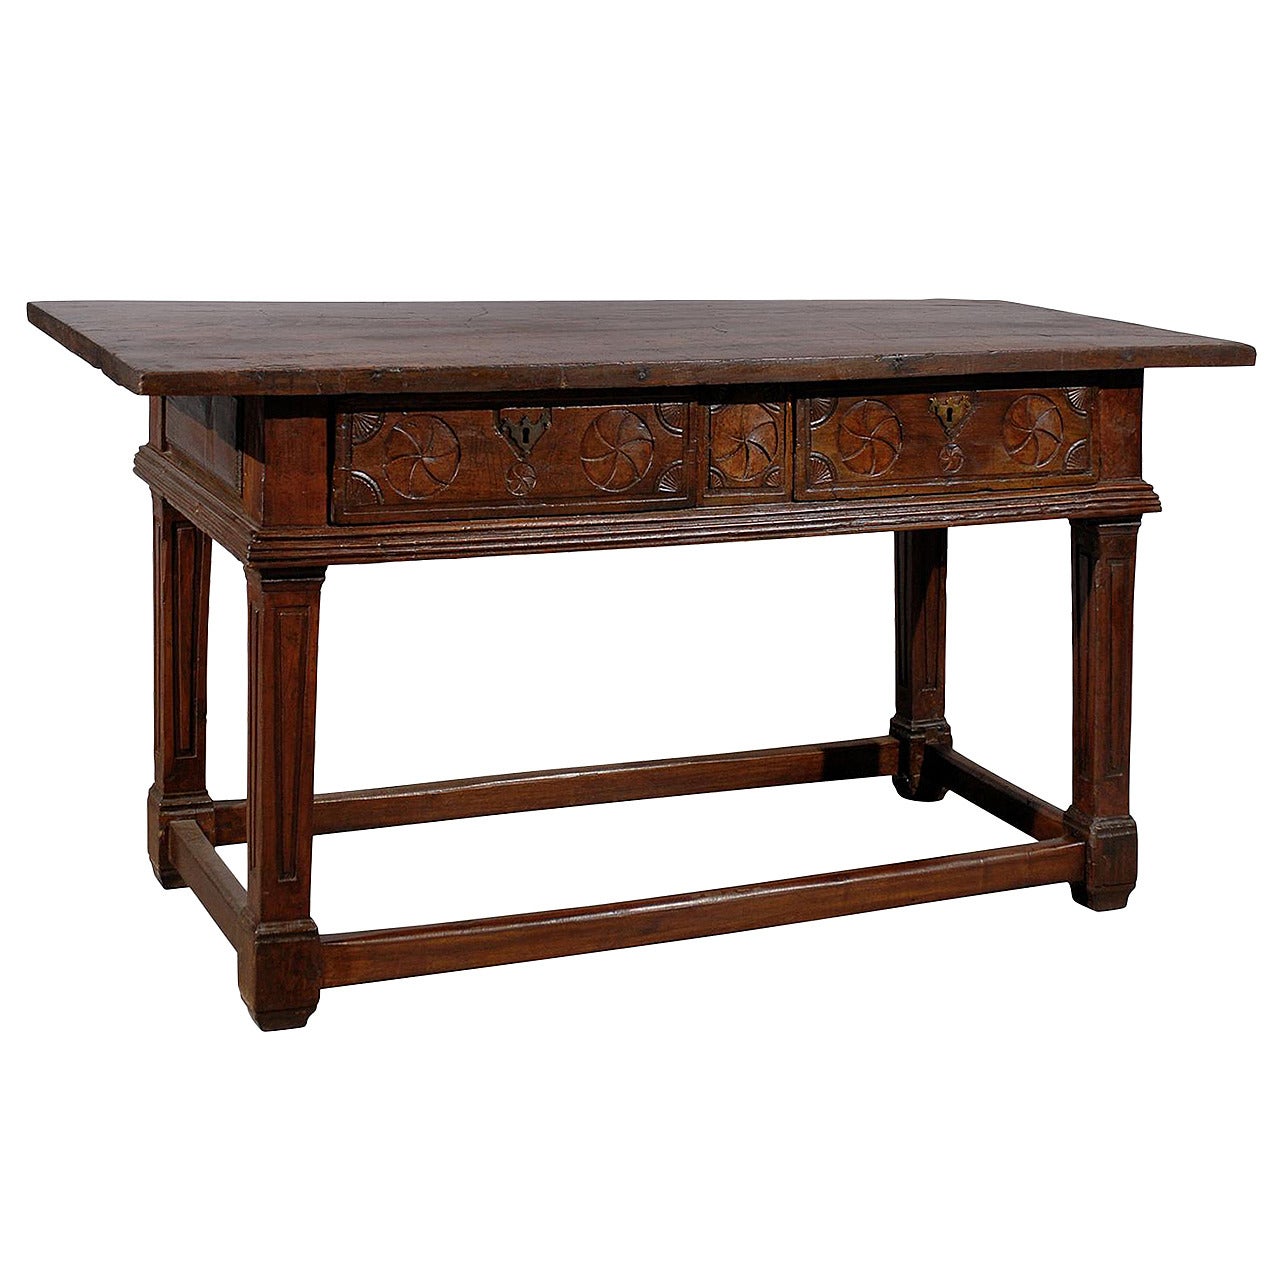 19th Century Italian Oak and Walnut Console Table with 2 Drawers